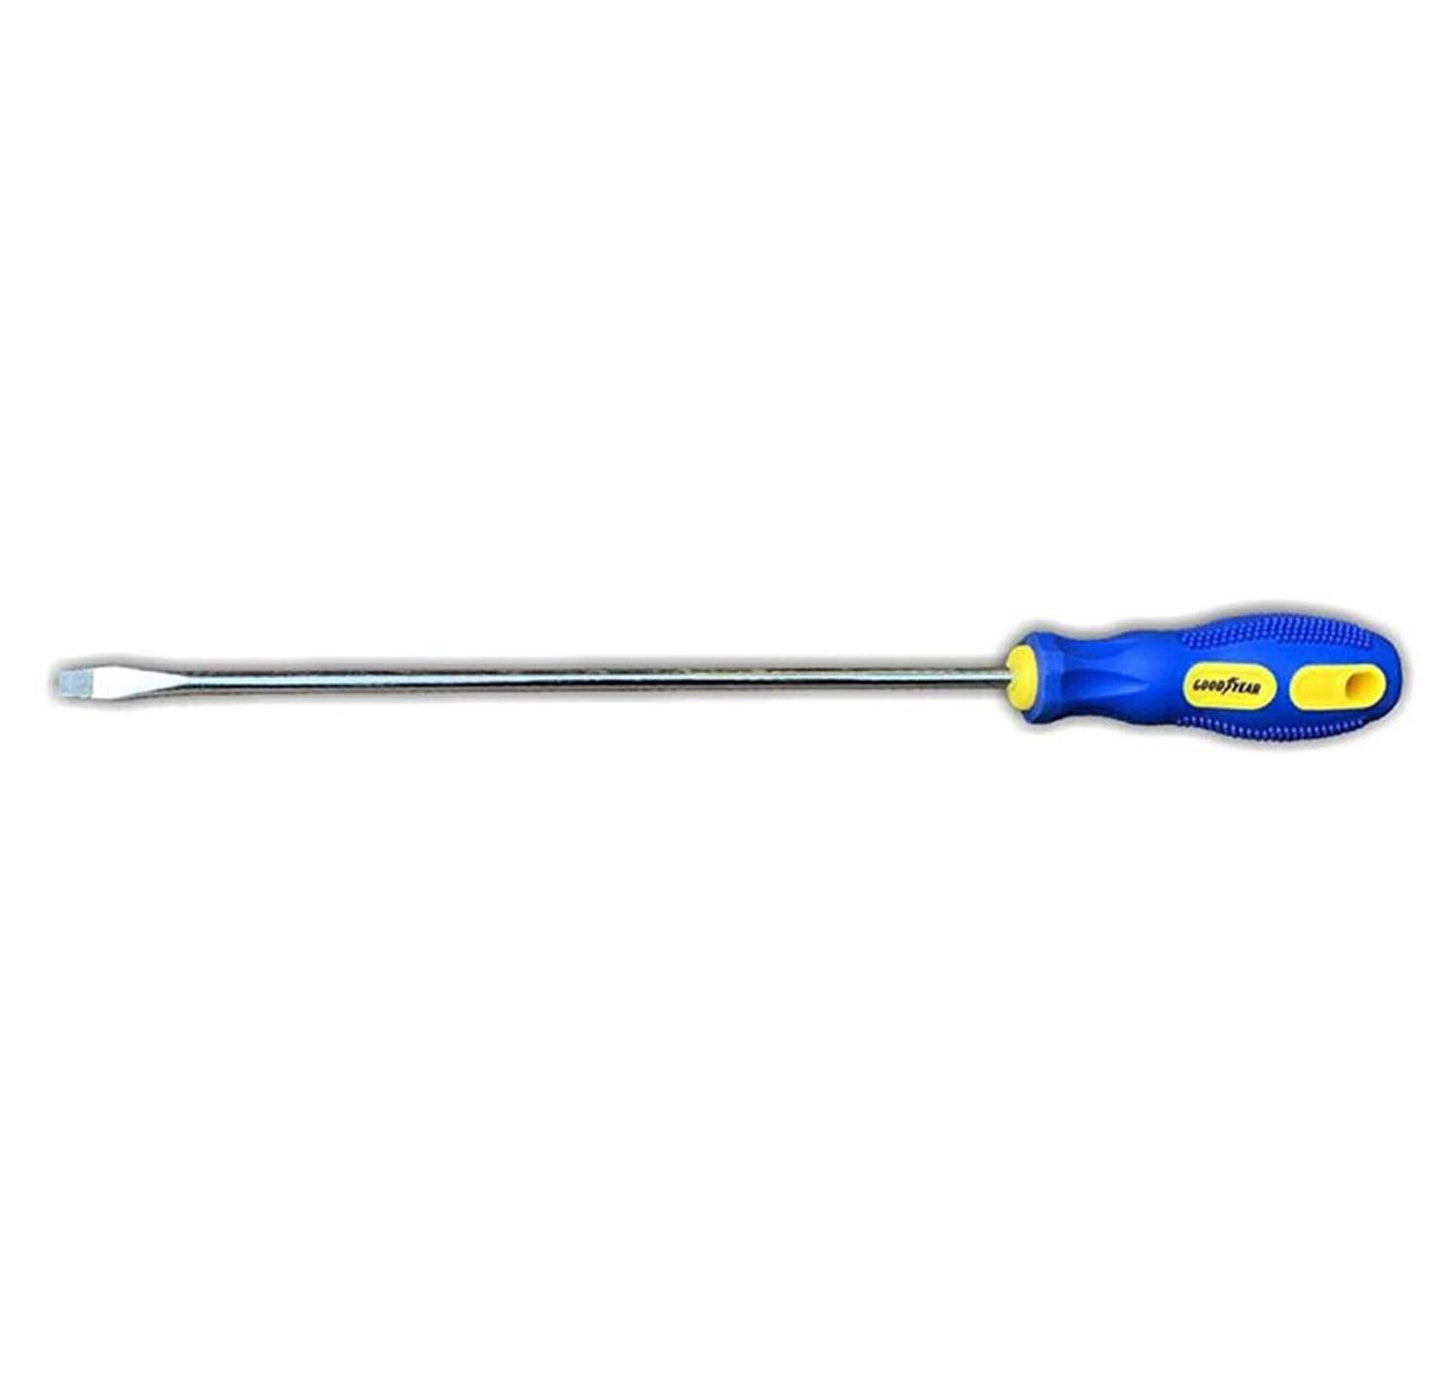 Goodyear Screwdriver Flat Head With Dual Colour Confortable Grip - 4.5mm Rod Size